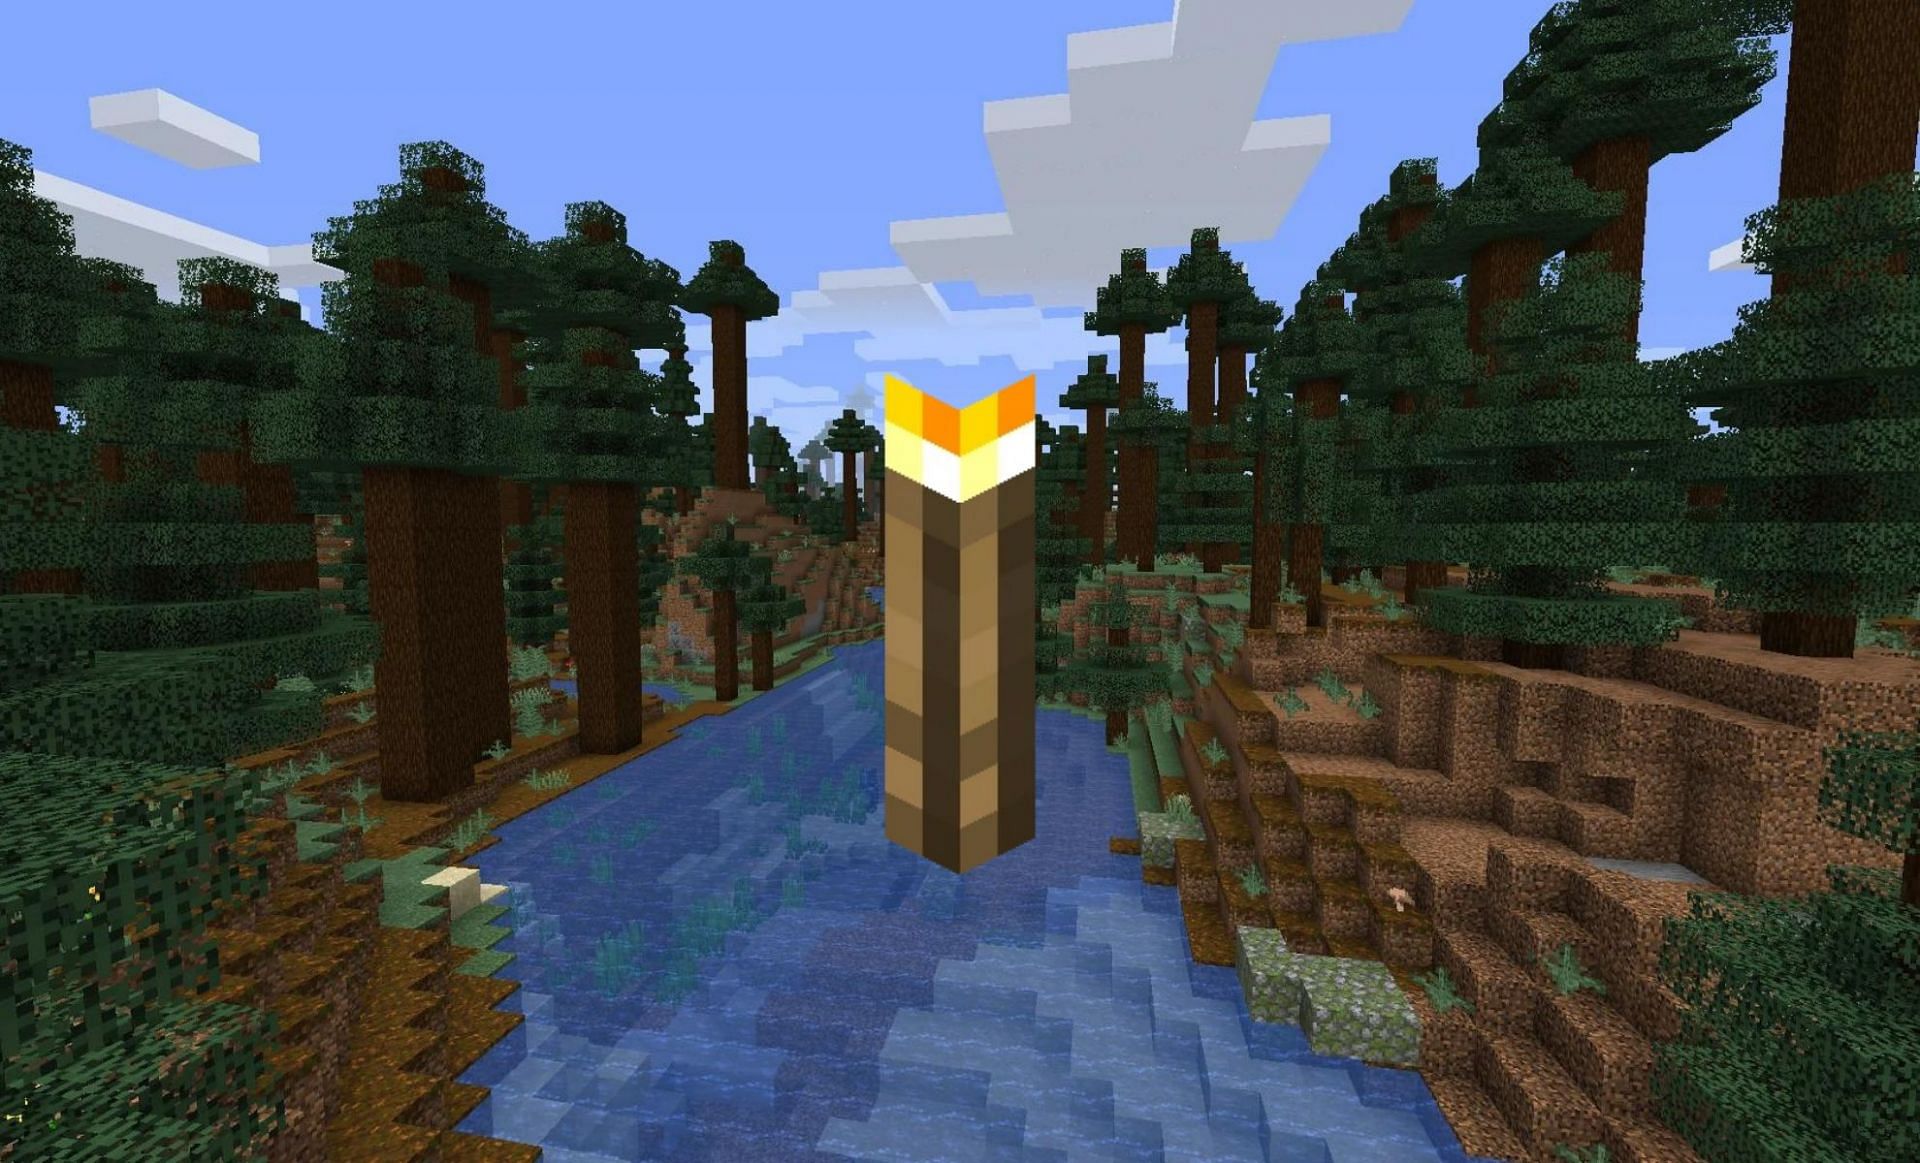 A Torch as seen in the game (Images via Minecraft Wiki)